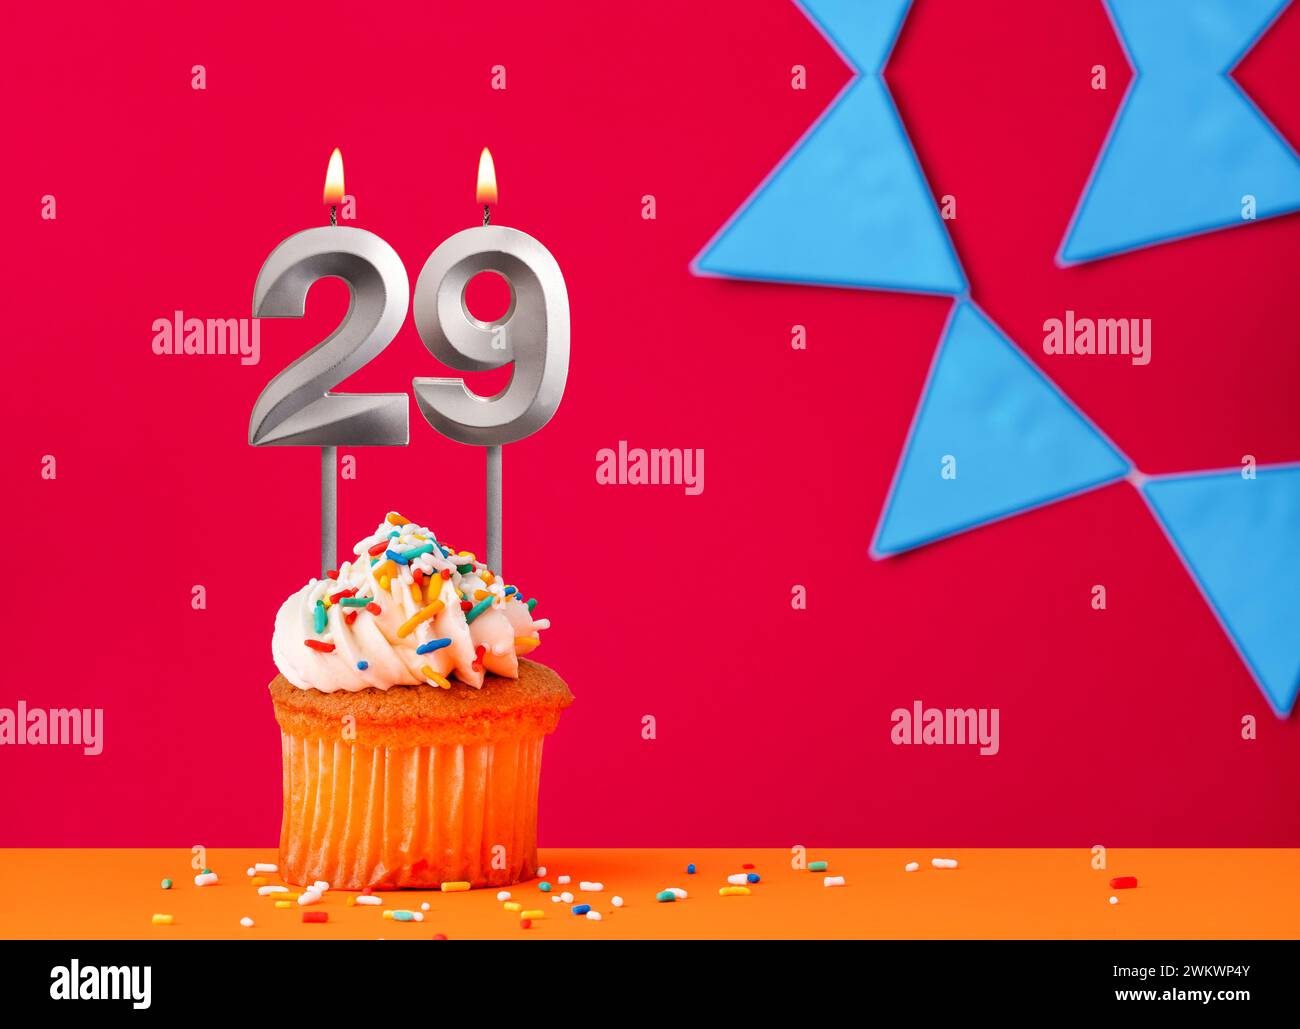 Number 29 candle with birthday cupcake on a red background with blue pennants Stock Photo